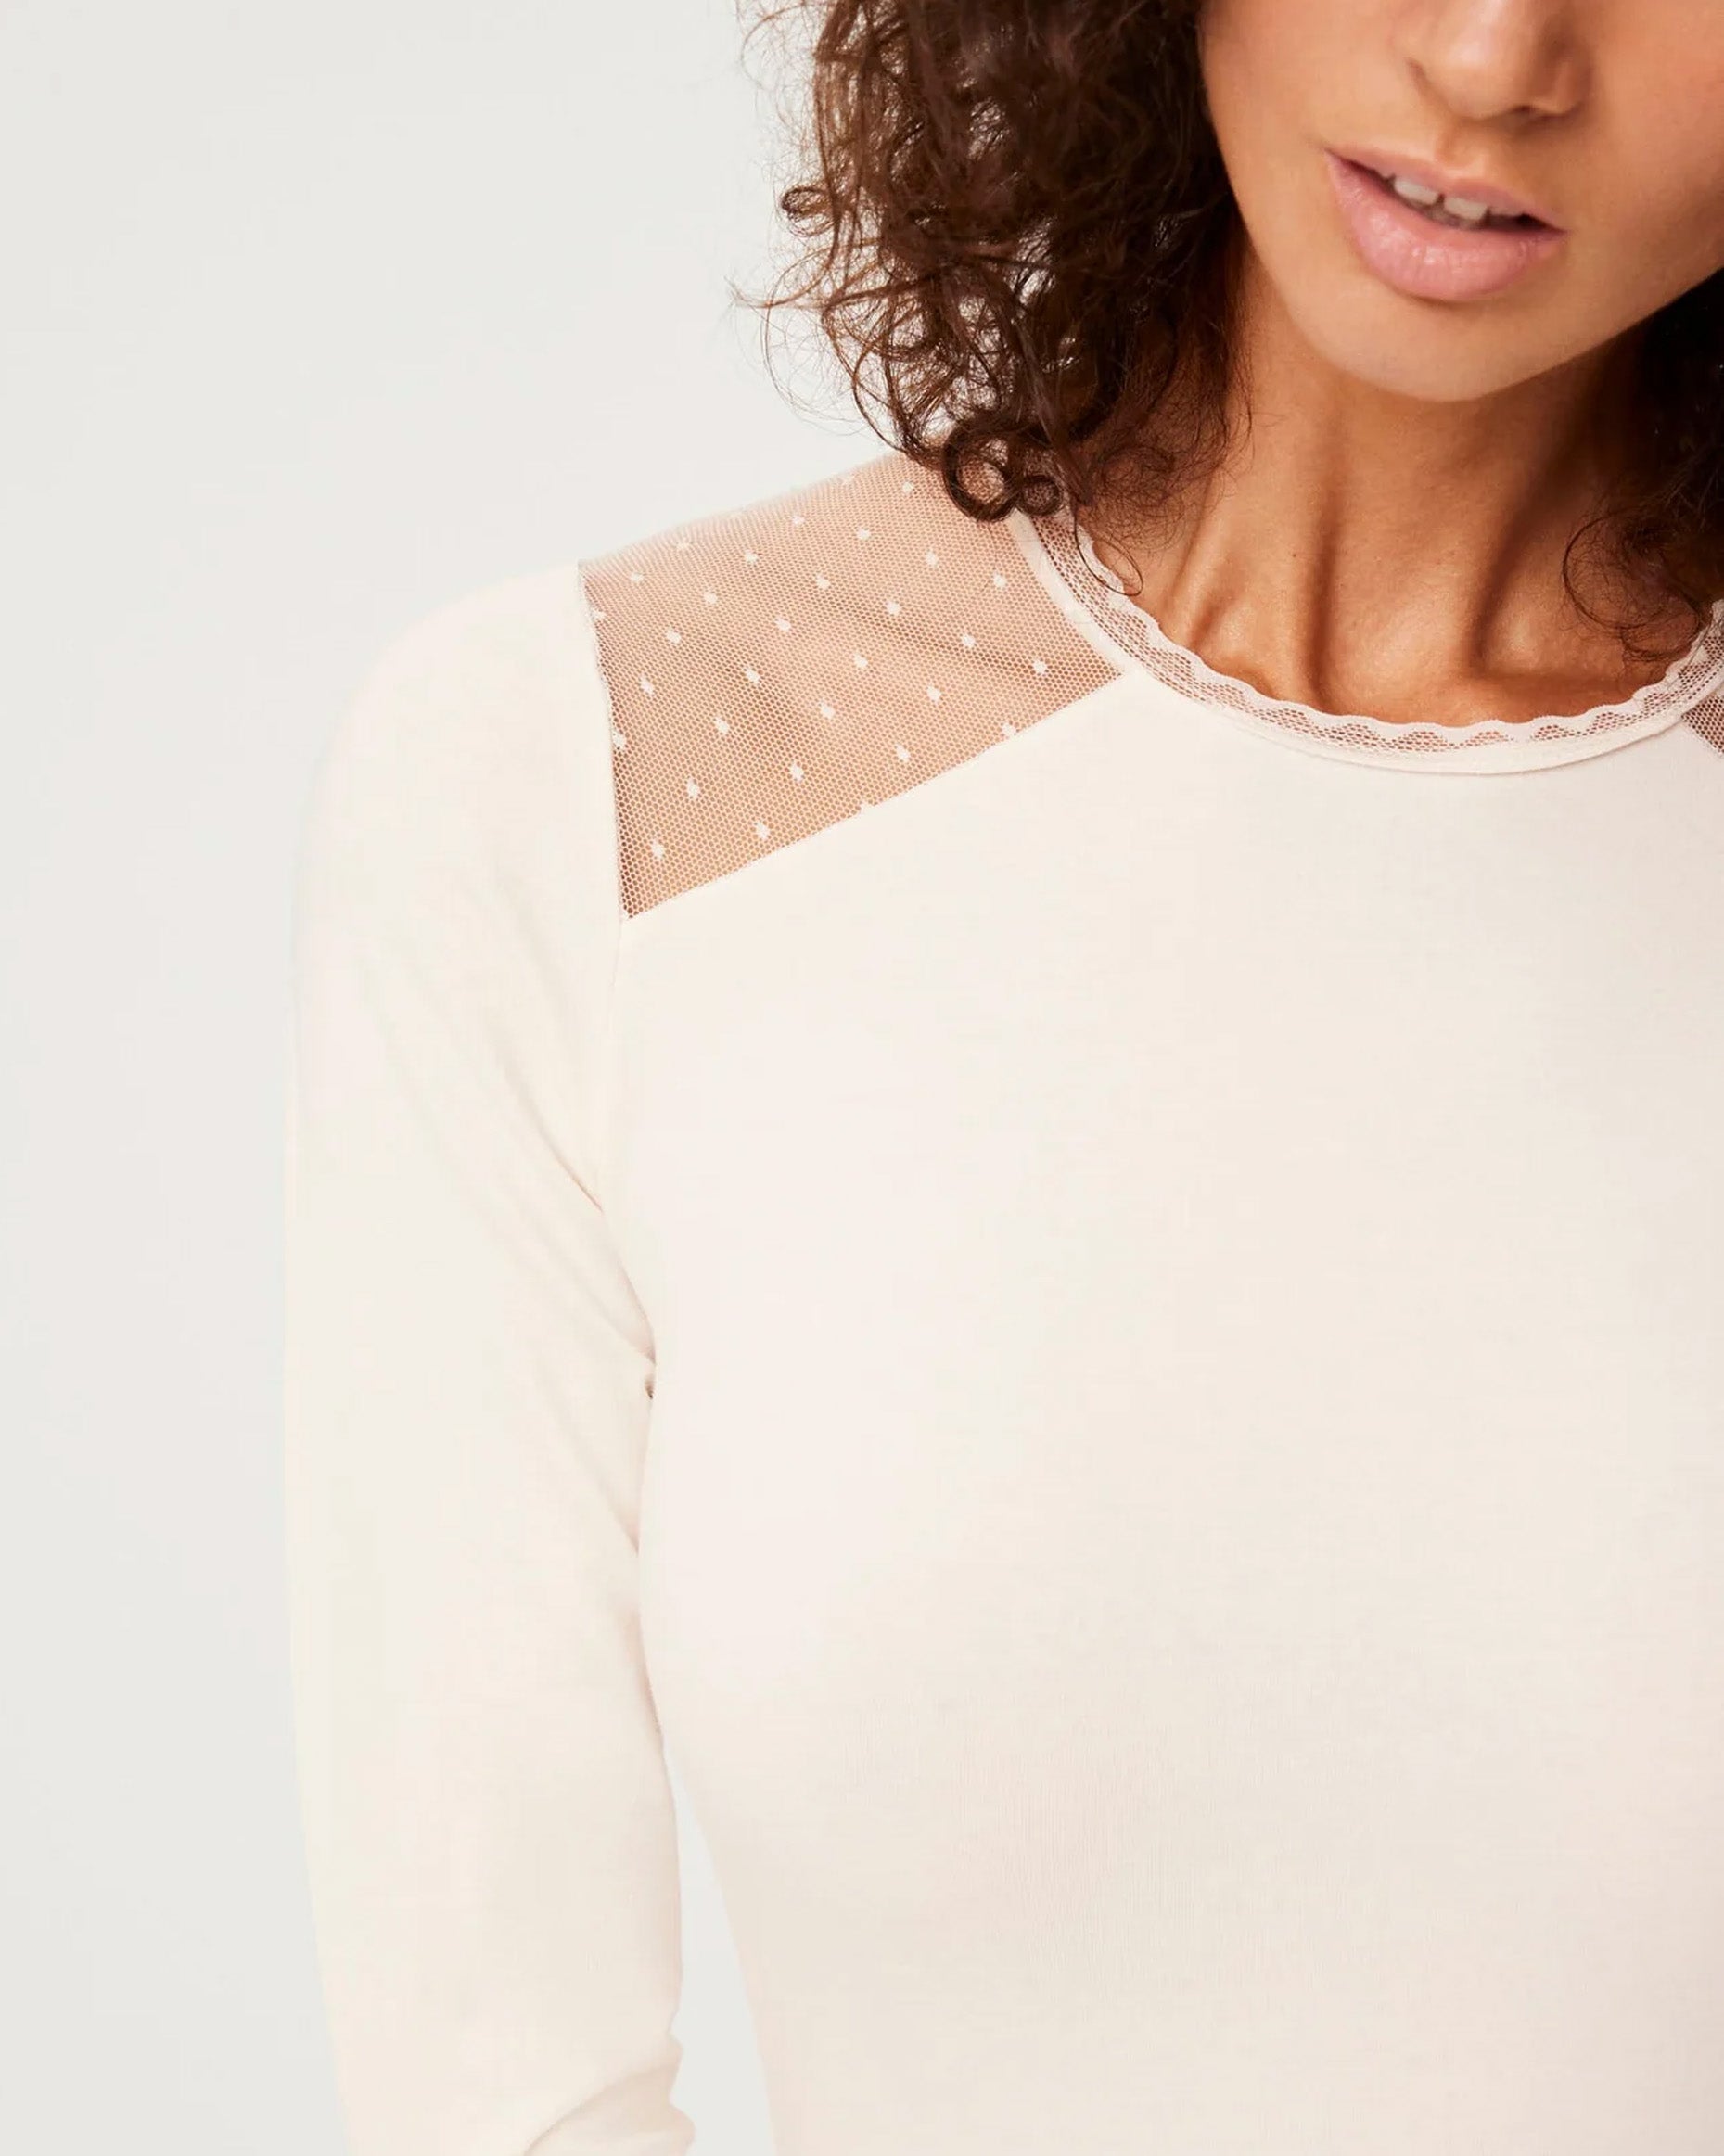 Ysabel Mora 19537 Tulle Shoulder Top - Cream soft and light long sleeved cotton top with sheer spot pattern mesh panels on the shoulders and scalloped crew neck trim.